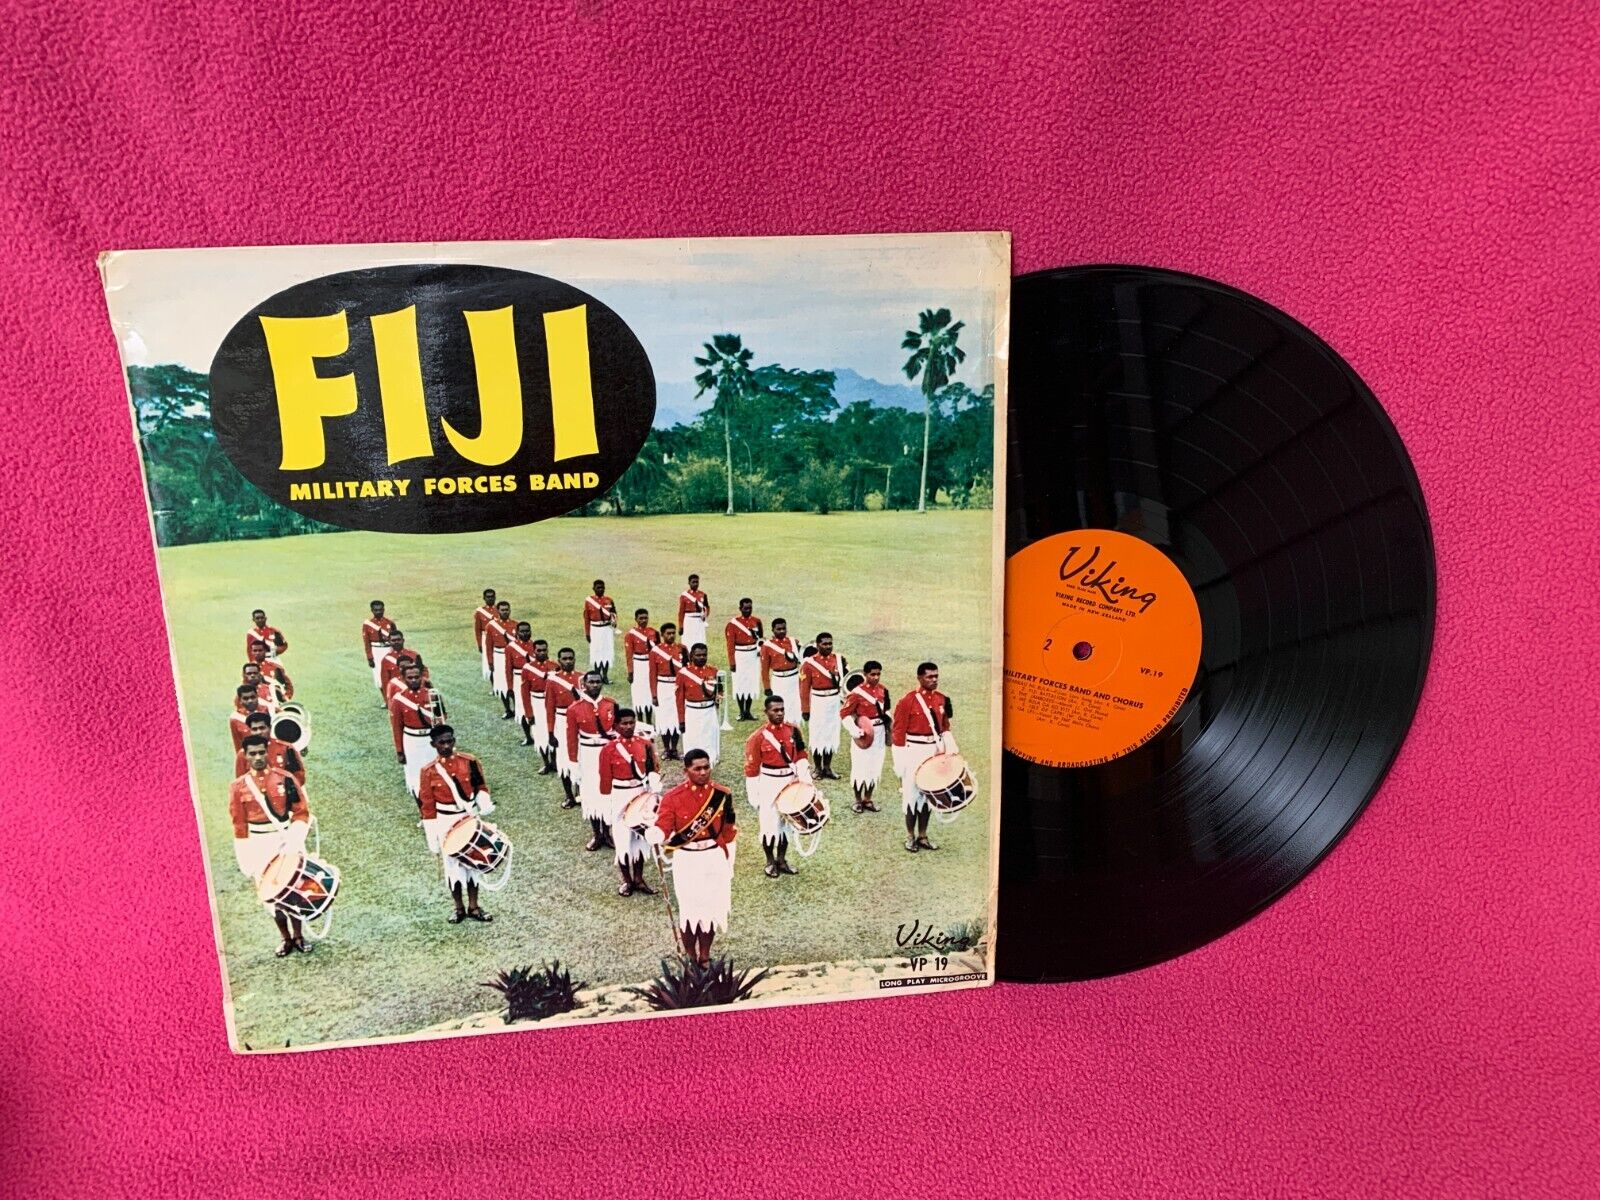 world MUSIC record FIJI MILITARY FORCES BAND and CHORUS new zealand BRASS march